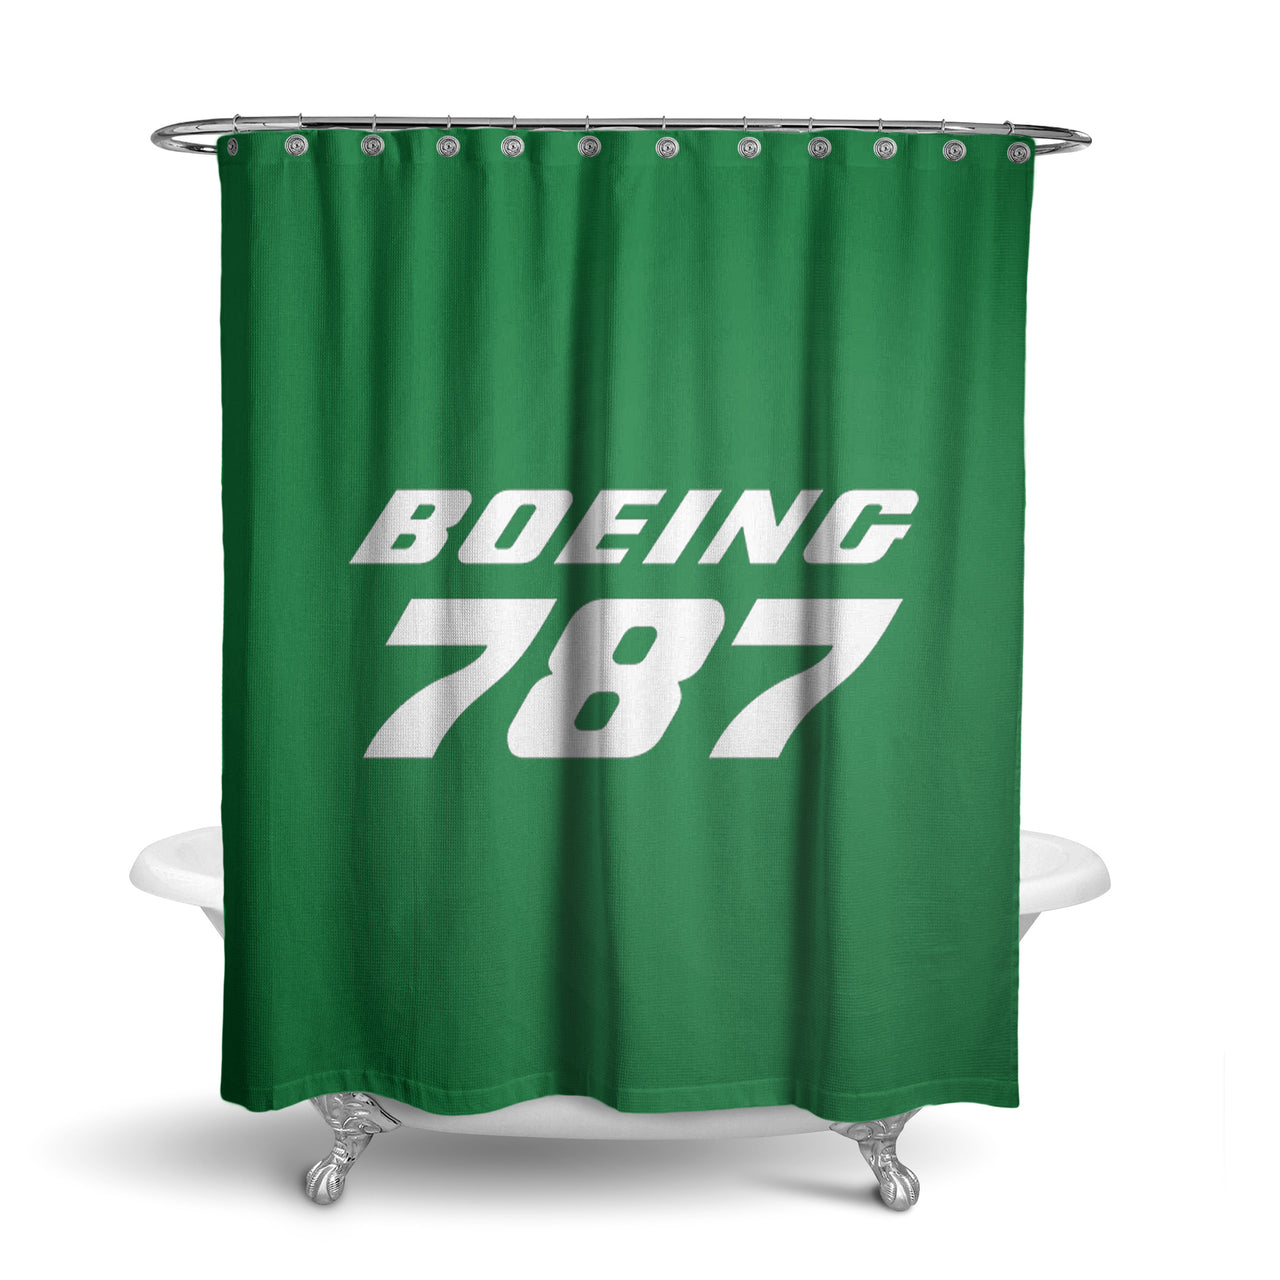 Boeing 787 & Text Designed Shower Curtains